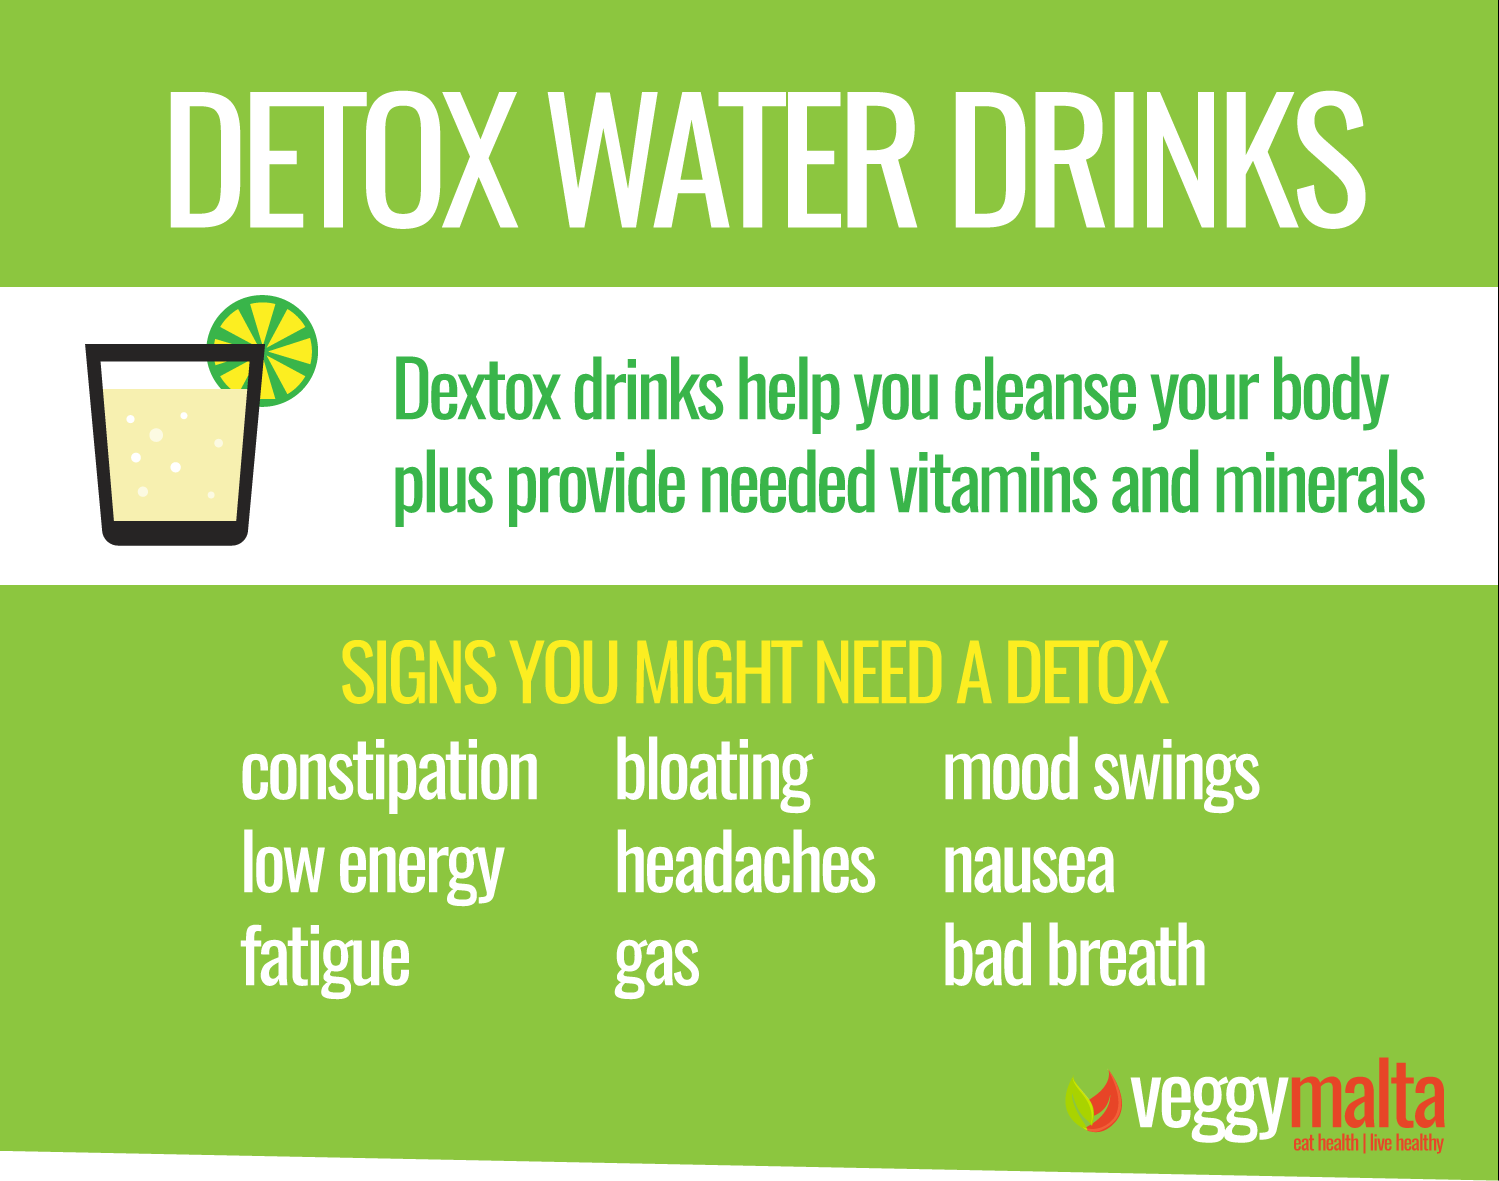 detox-water-drinks-signs-you-might-need-a-detox